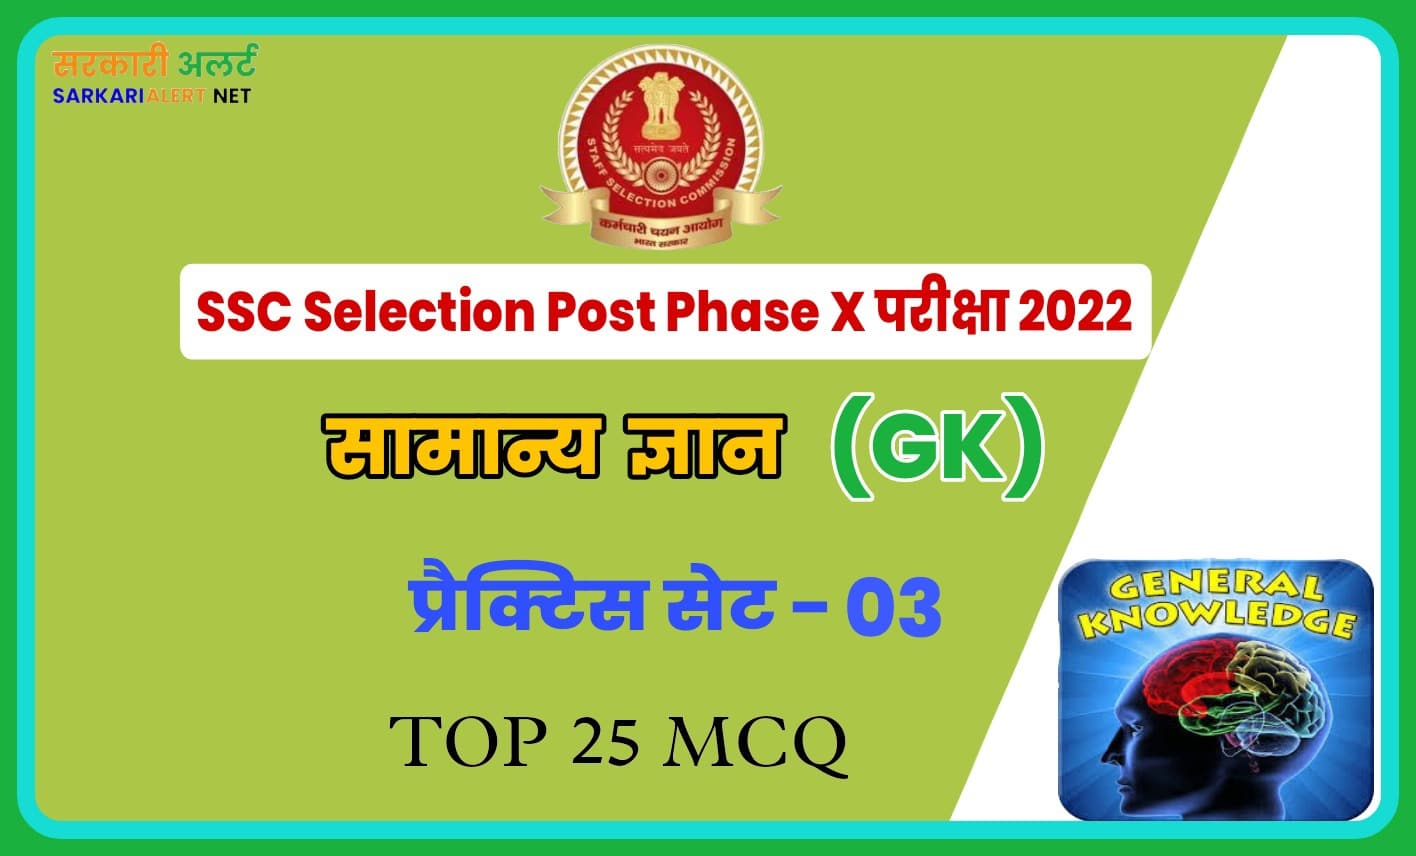 SSC Selection Post Phase X General Knowledge Practice Set 03